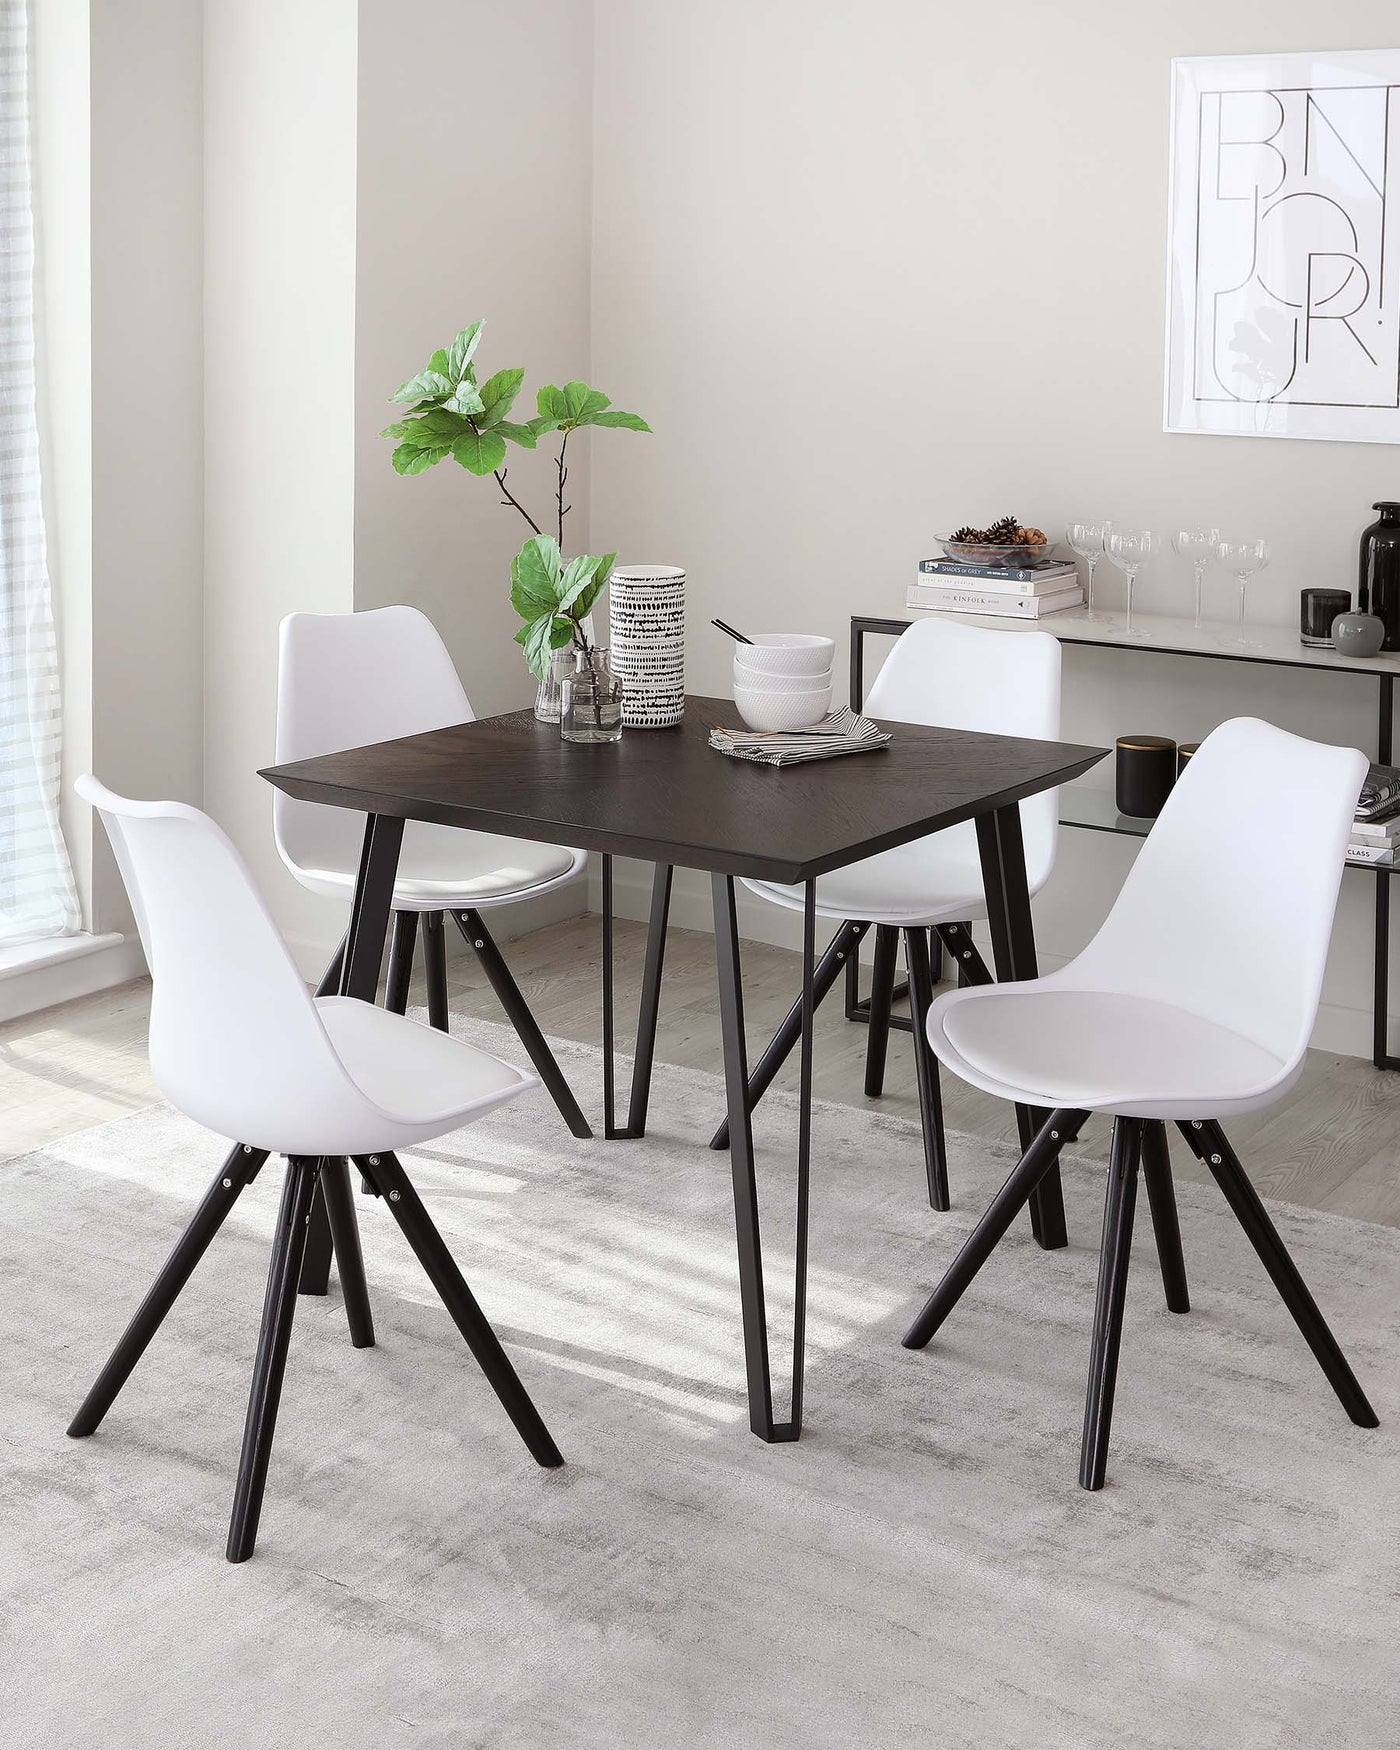 Contemporary dining set featuring a rectangular dark brown table with black tapered legs and four modern white chairs with black legs. The table is accessorized with a vase of greenery, books, and ceramic ware.